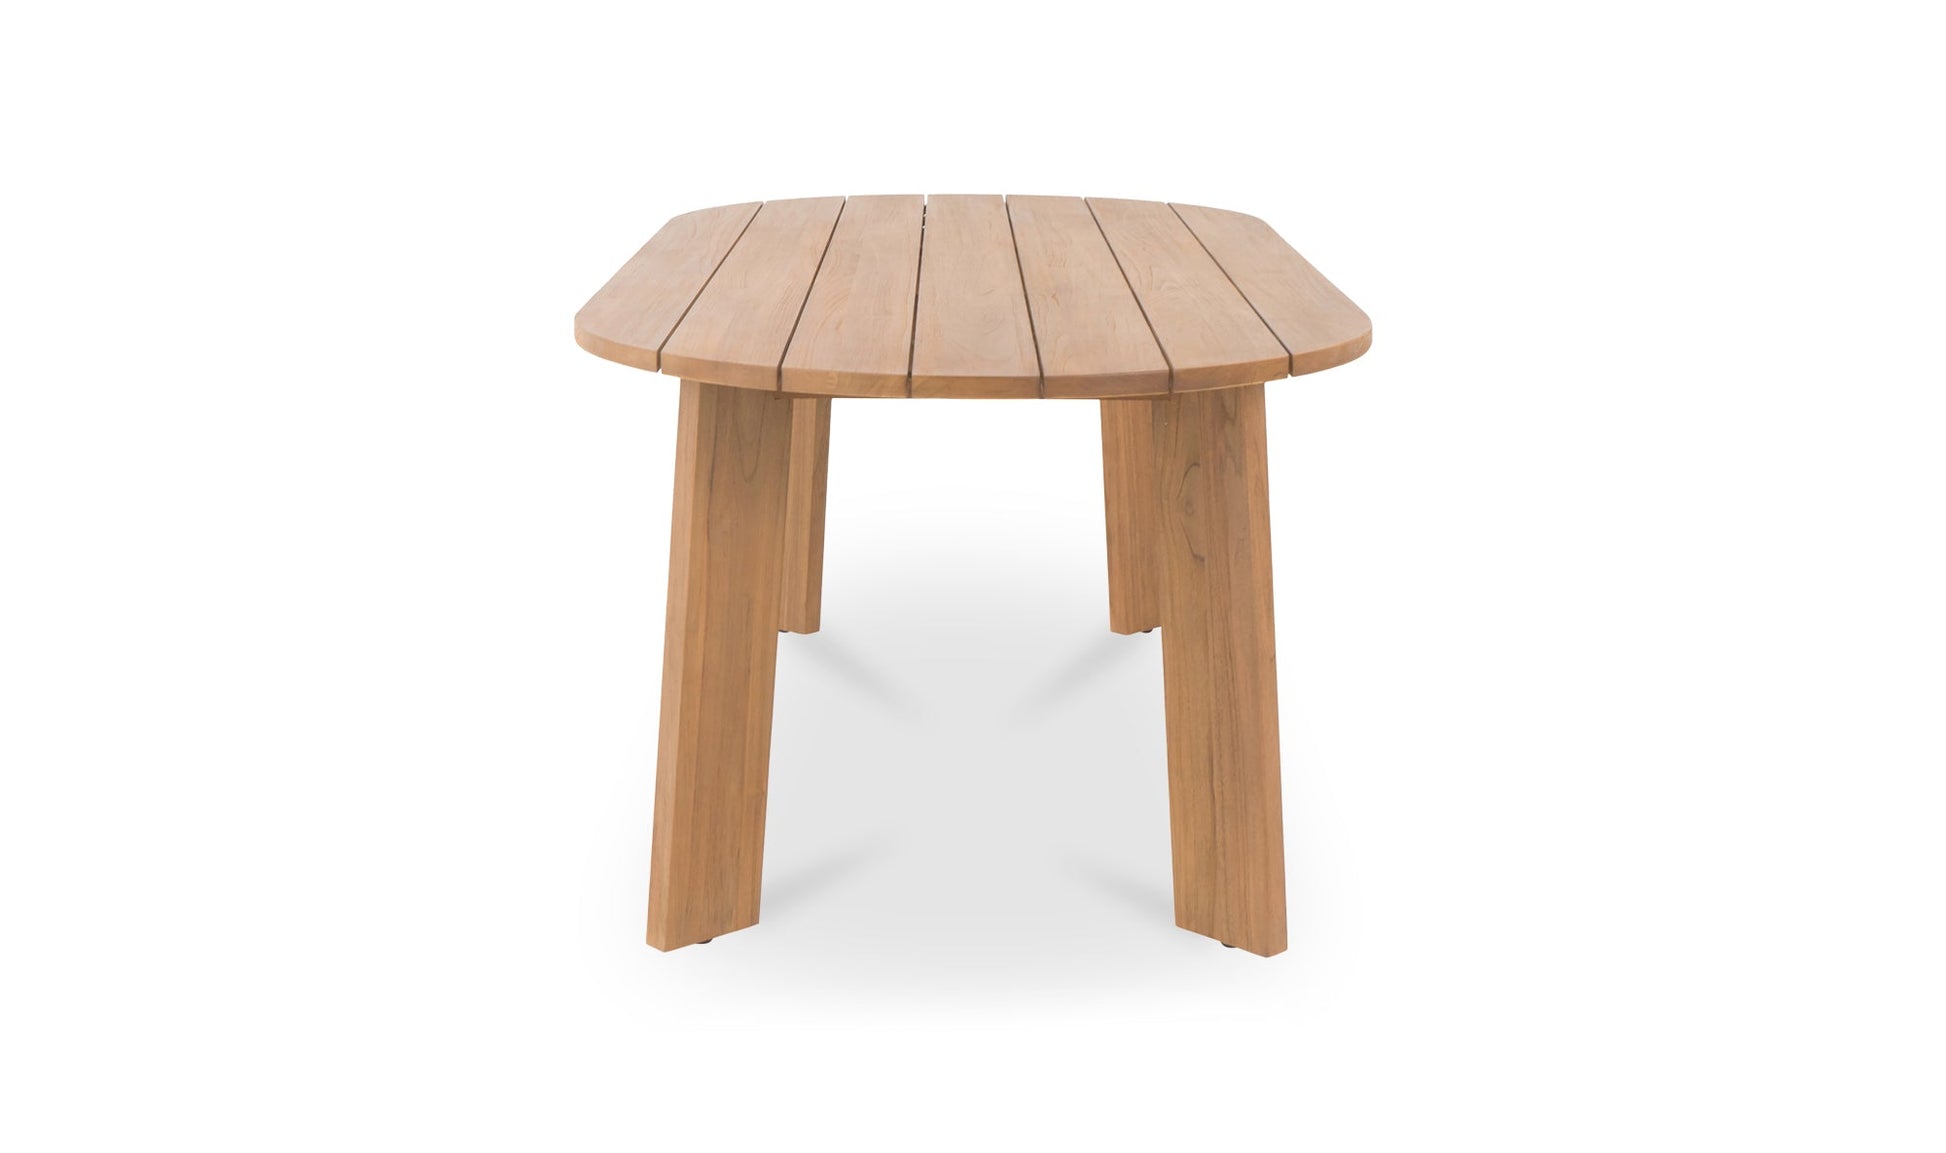 Moe's DELTA OUTDOOR DINING TABLE OVAL